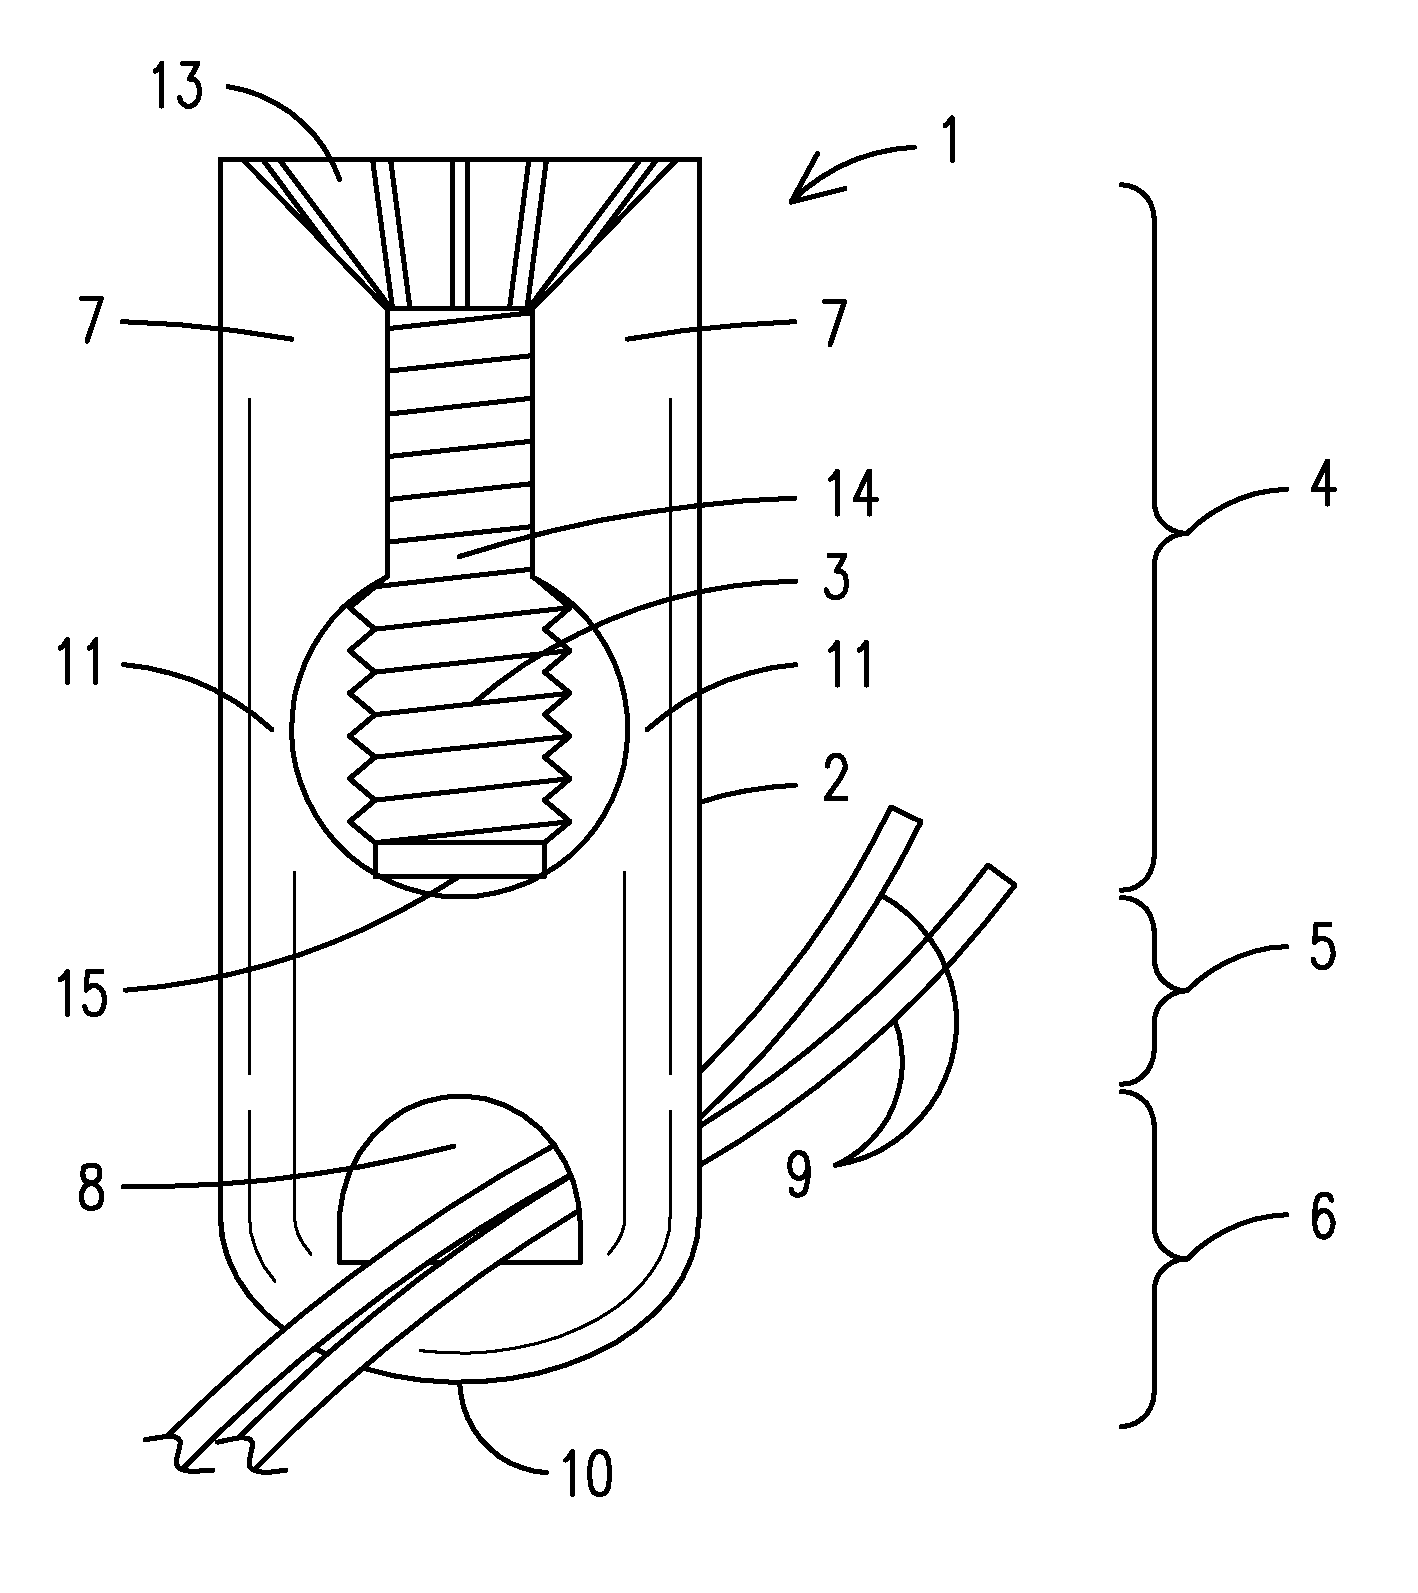 Knotless suture fixation device and method